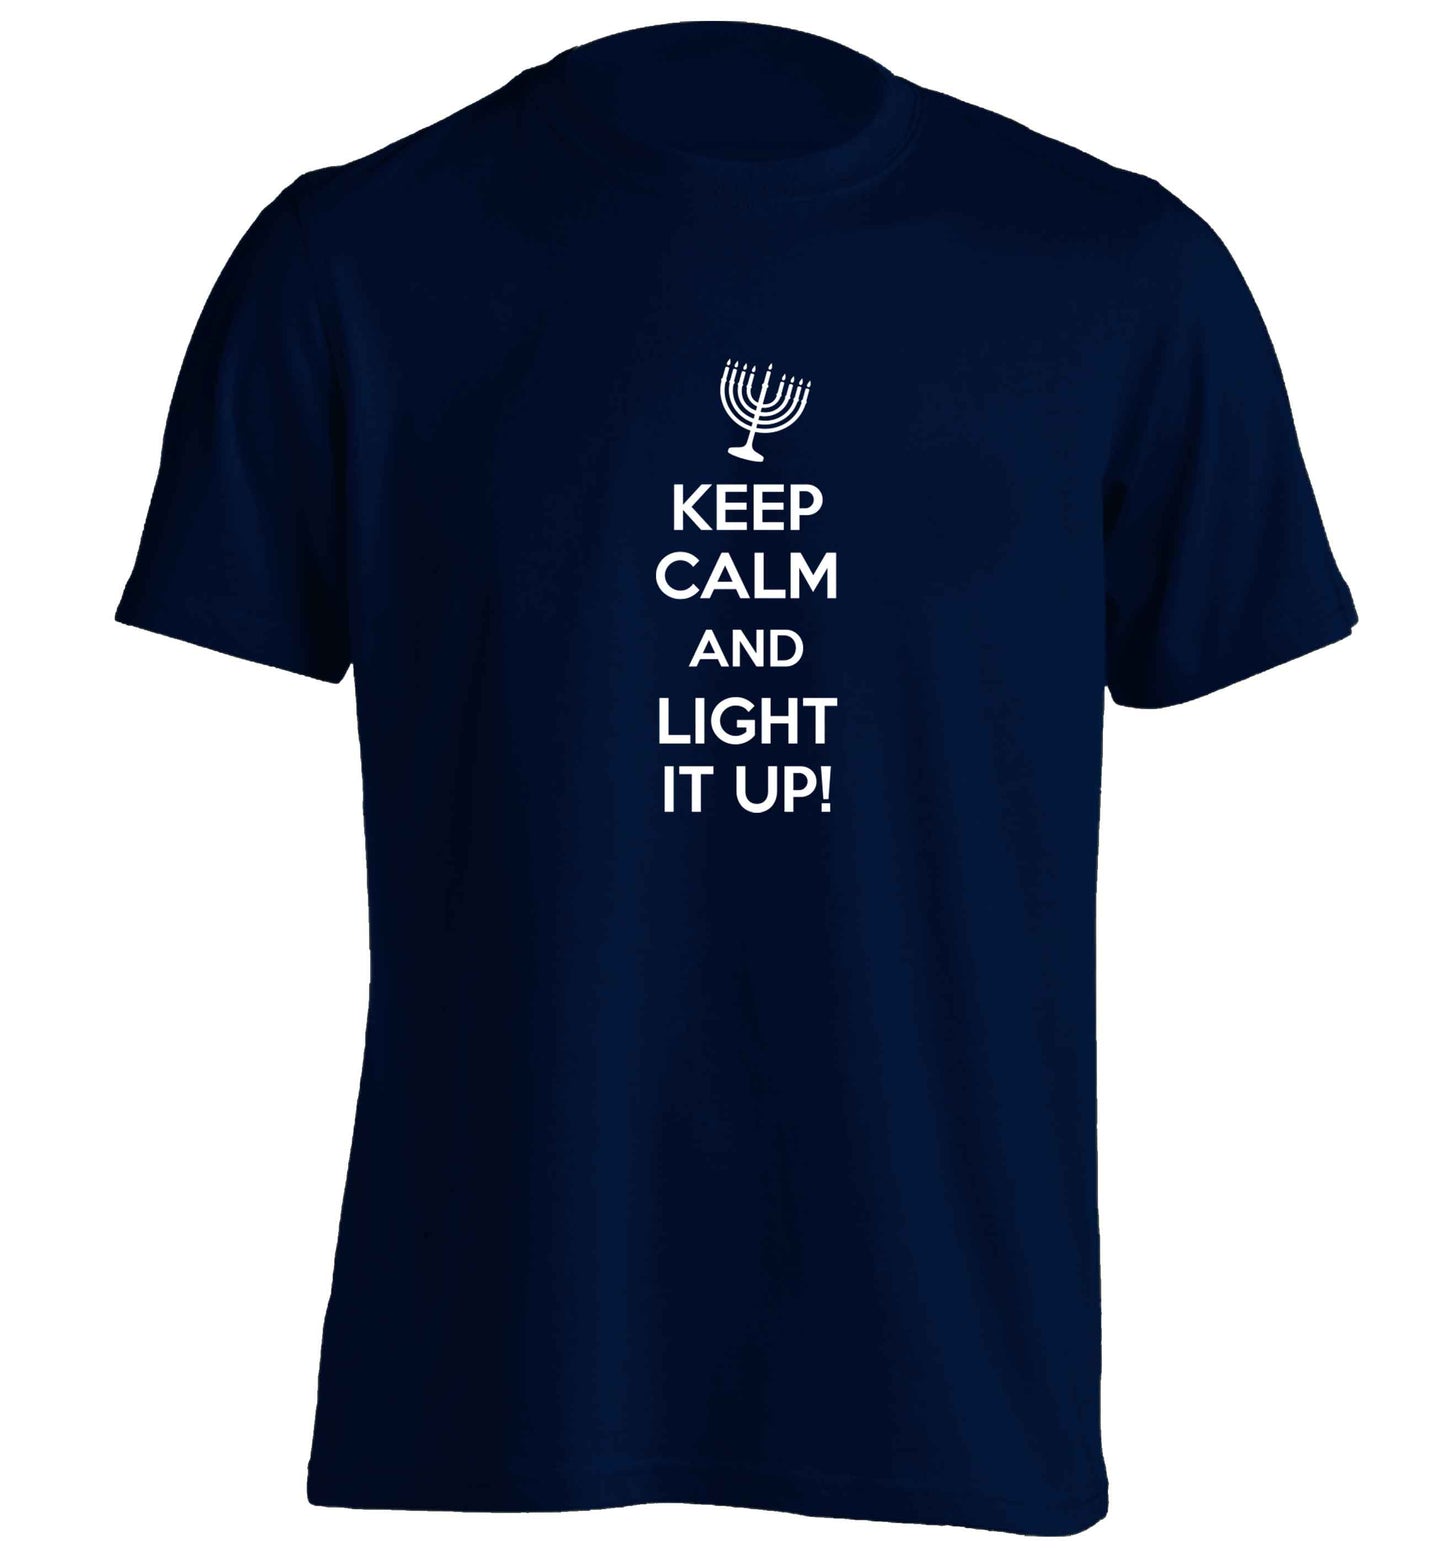 Keep calm and light it up adults unisex navy Tshirt 2XL